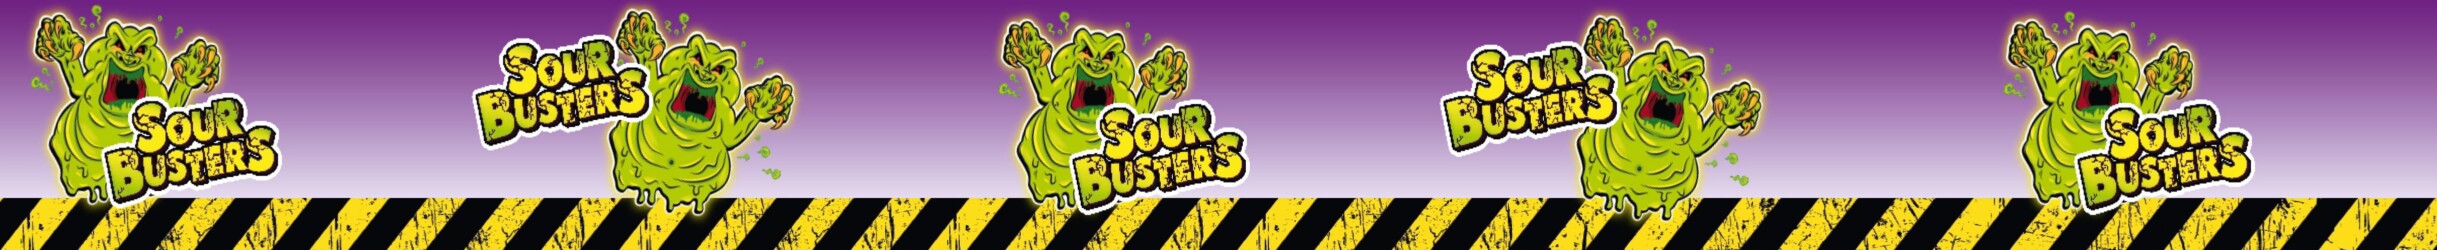 sourbusters-header